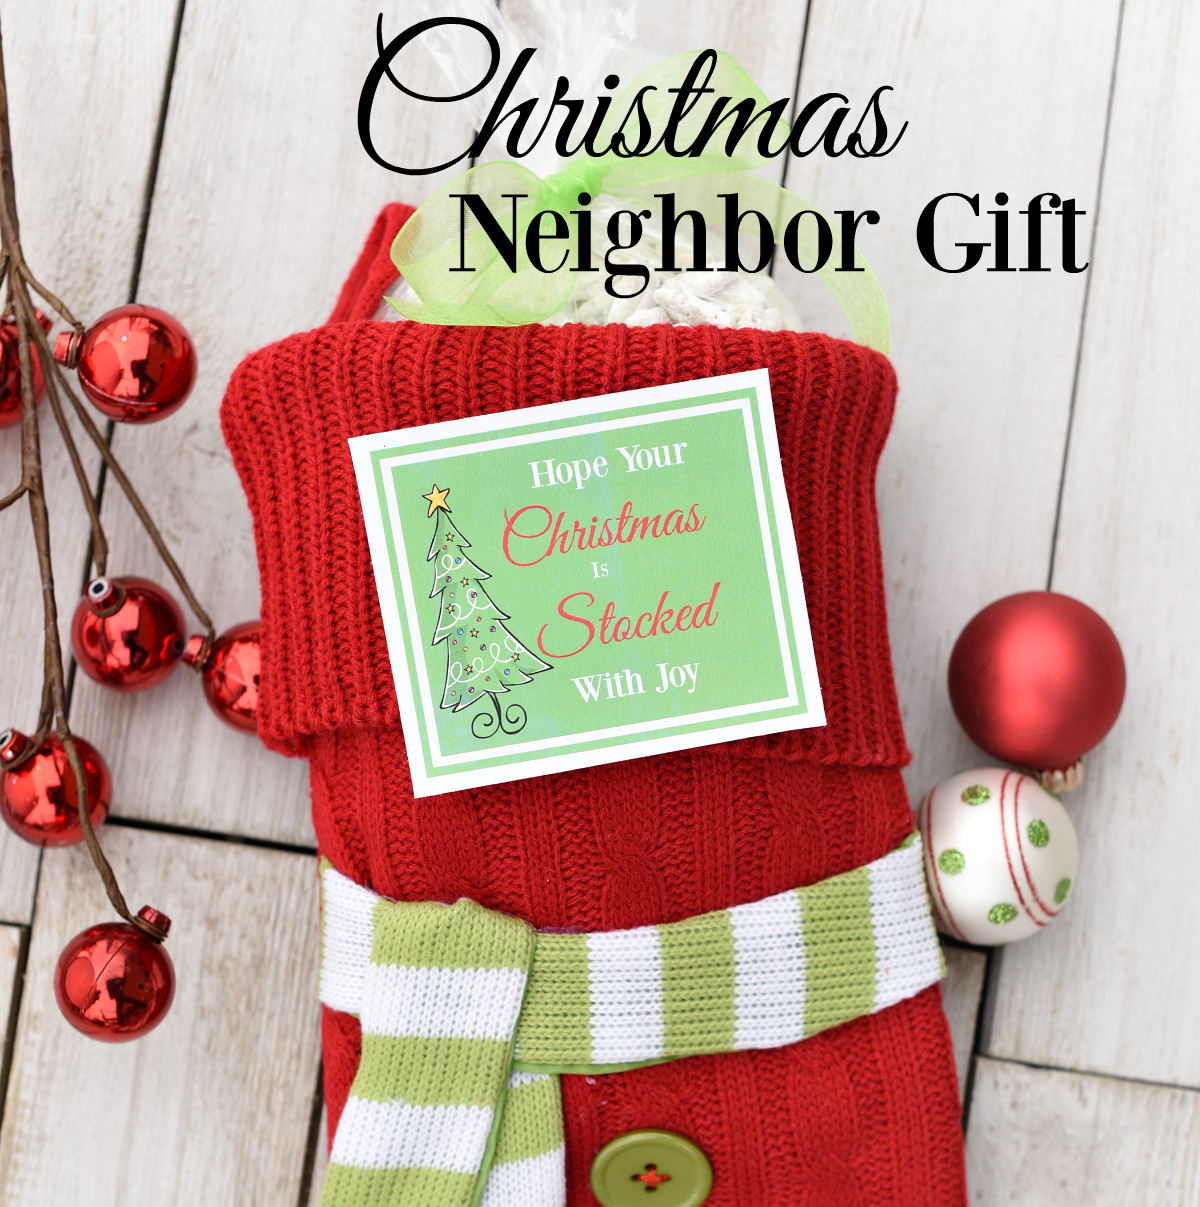 Fun Christmas Gift Ideas
 25 Fun Christmas Gifts for Friends and Neighbors – Fun Squared